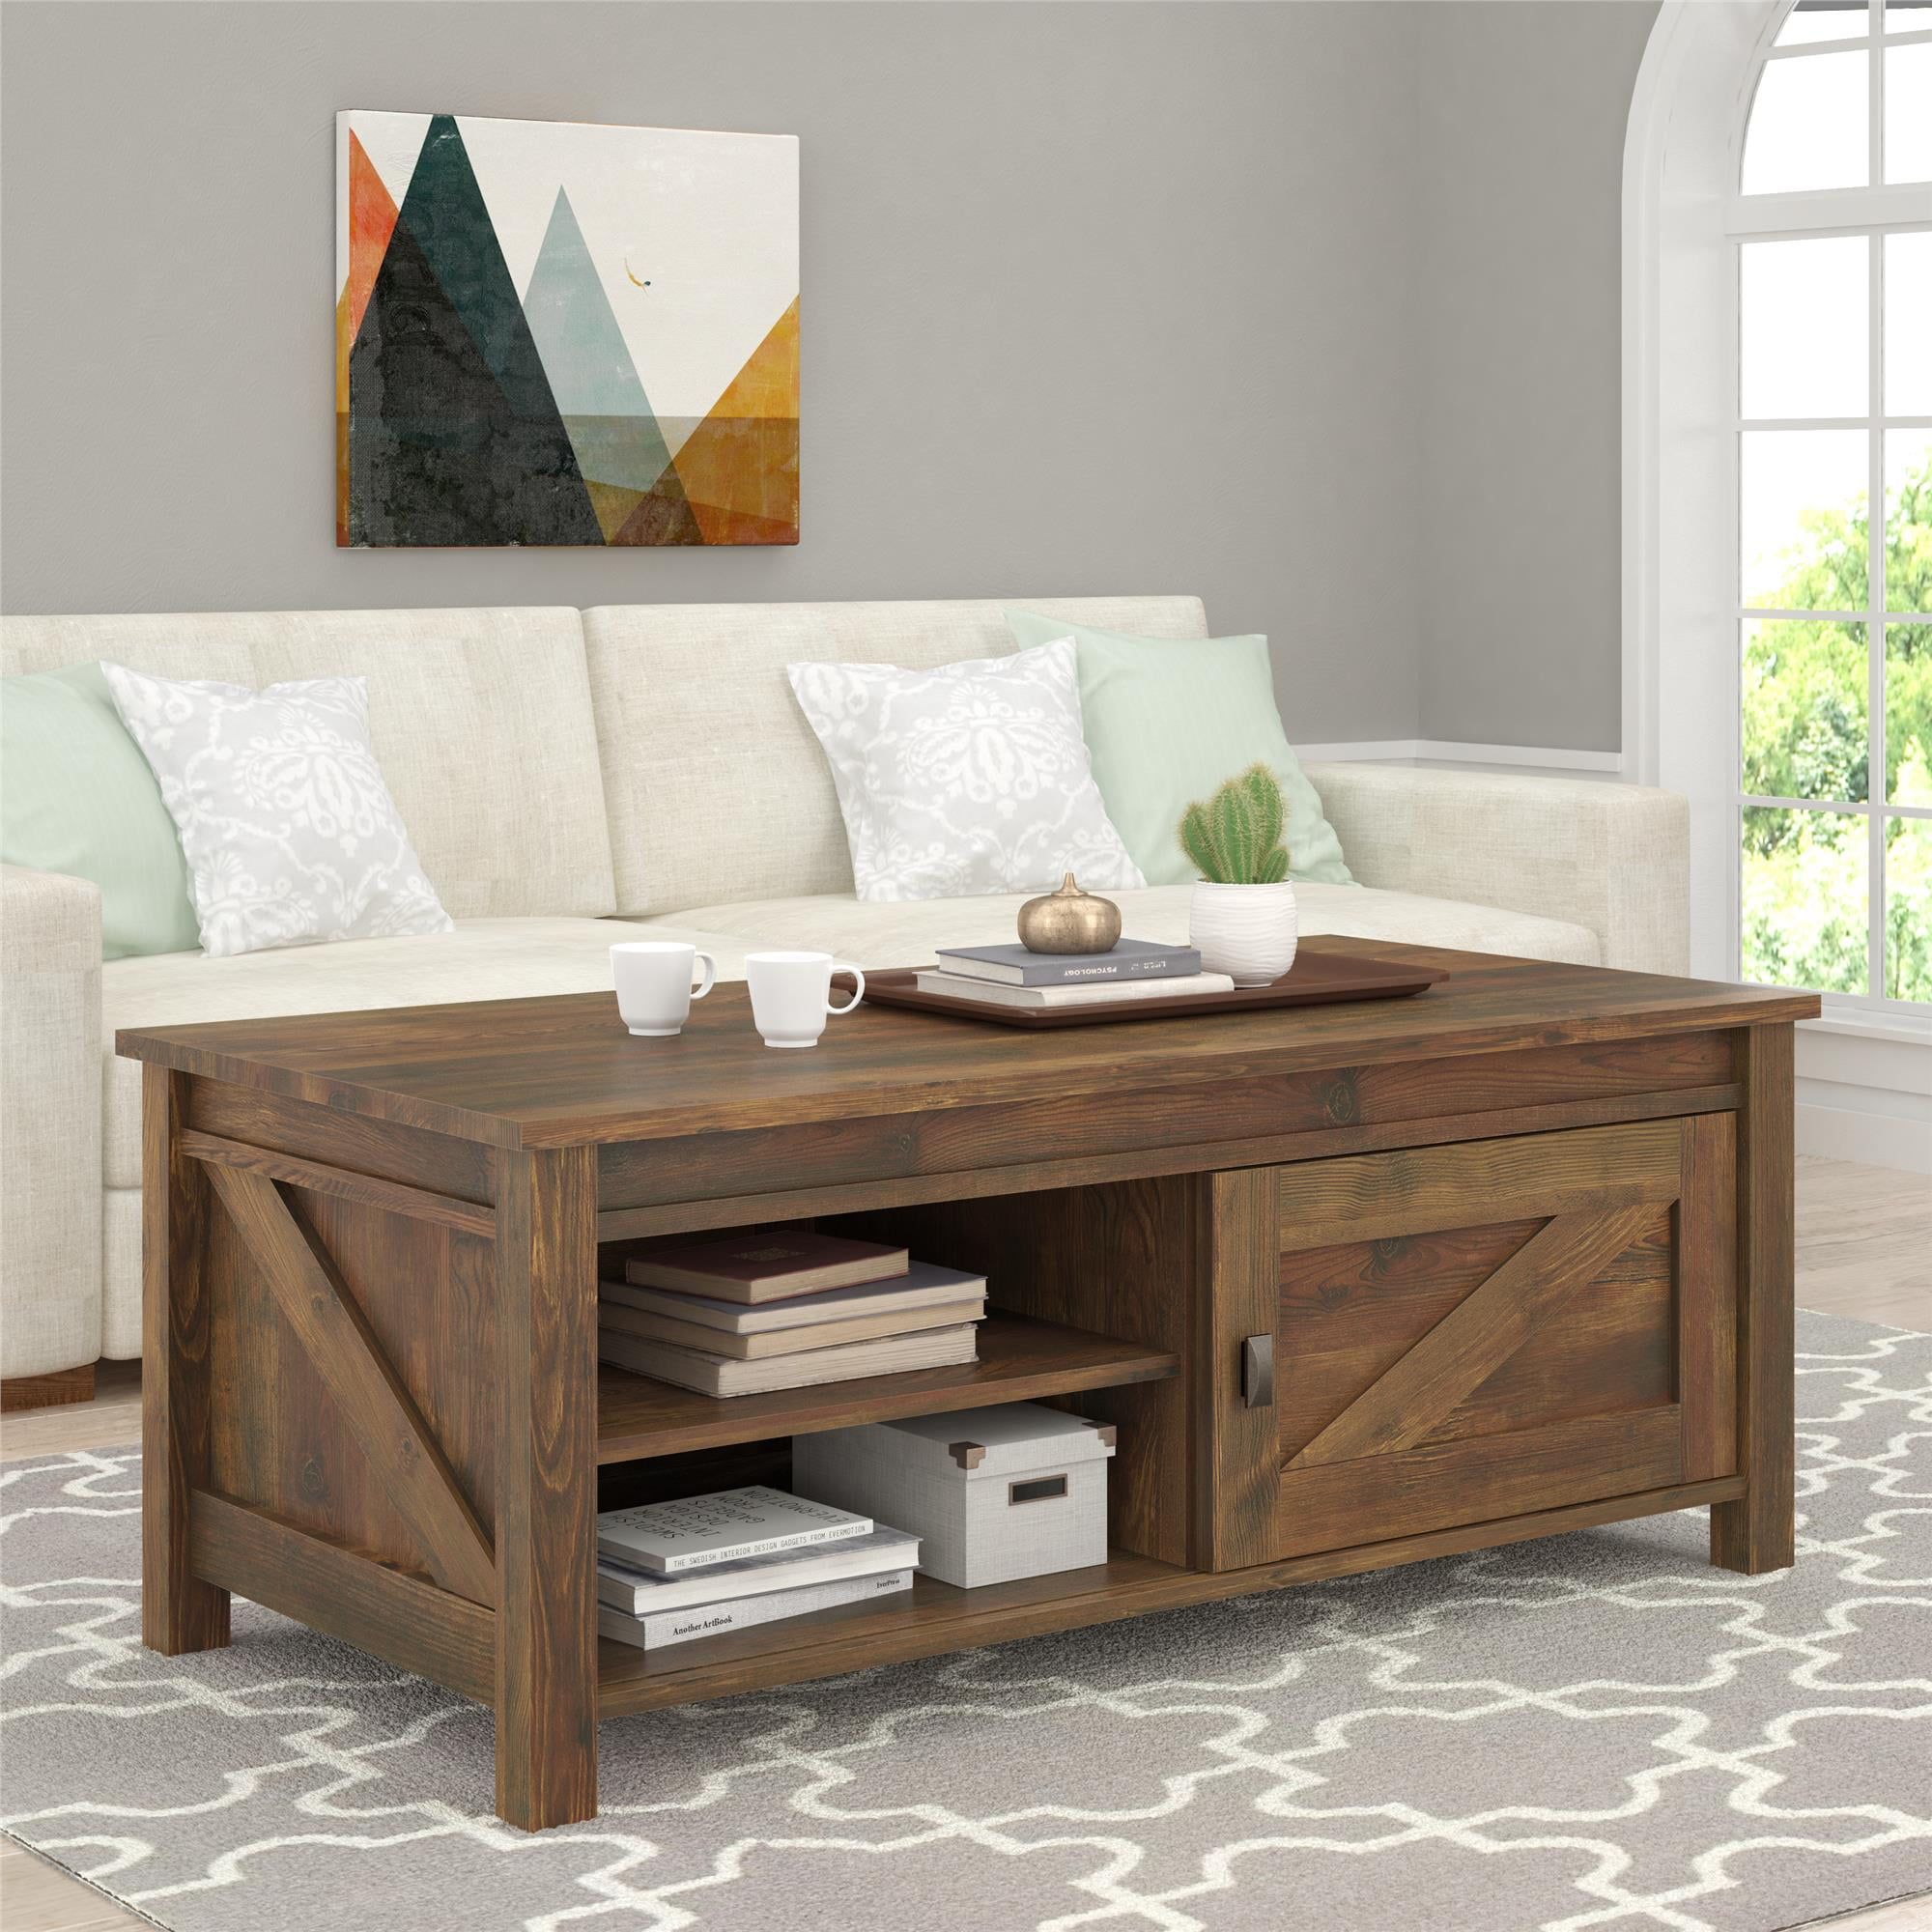 Ameriwood Home Farmington Coffee Table, Rustic – Walmart Throughout Rustic Coffee Tables (Gallery 6 of 20)